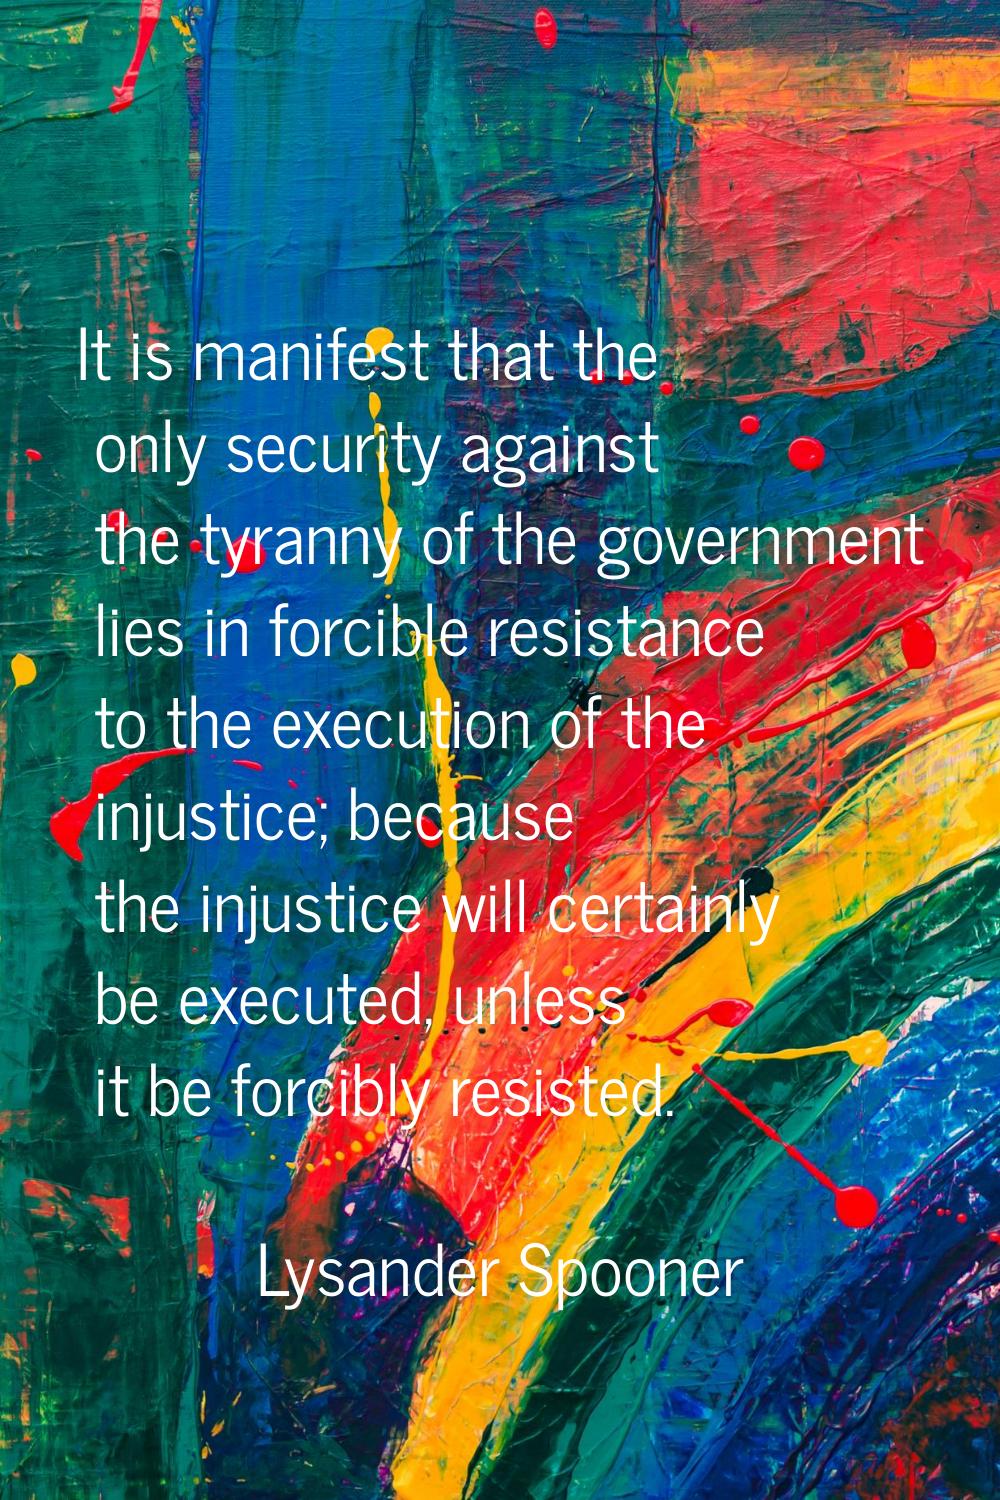 It is manifest that the only security against the tyranny of the government lies in forcible resist